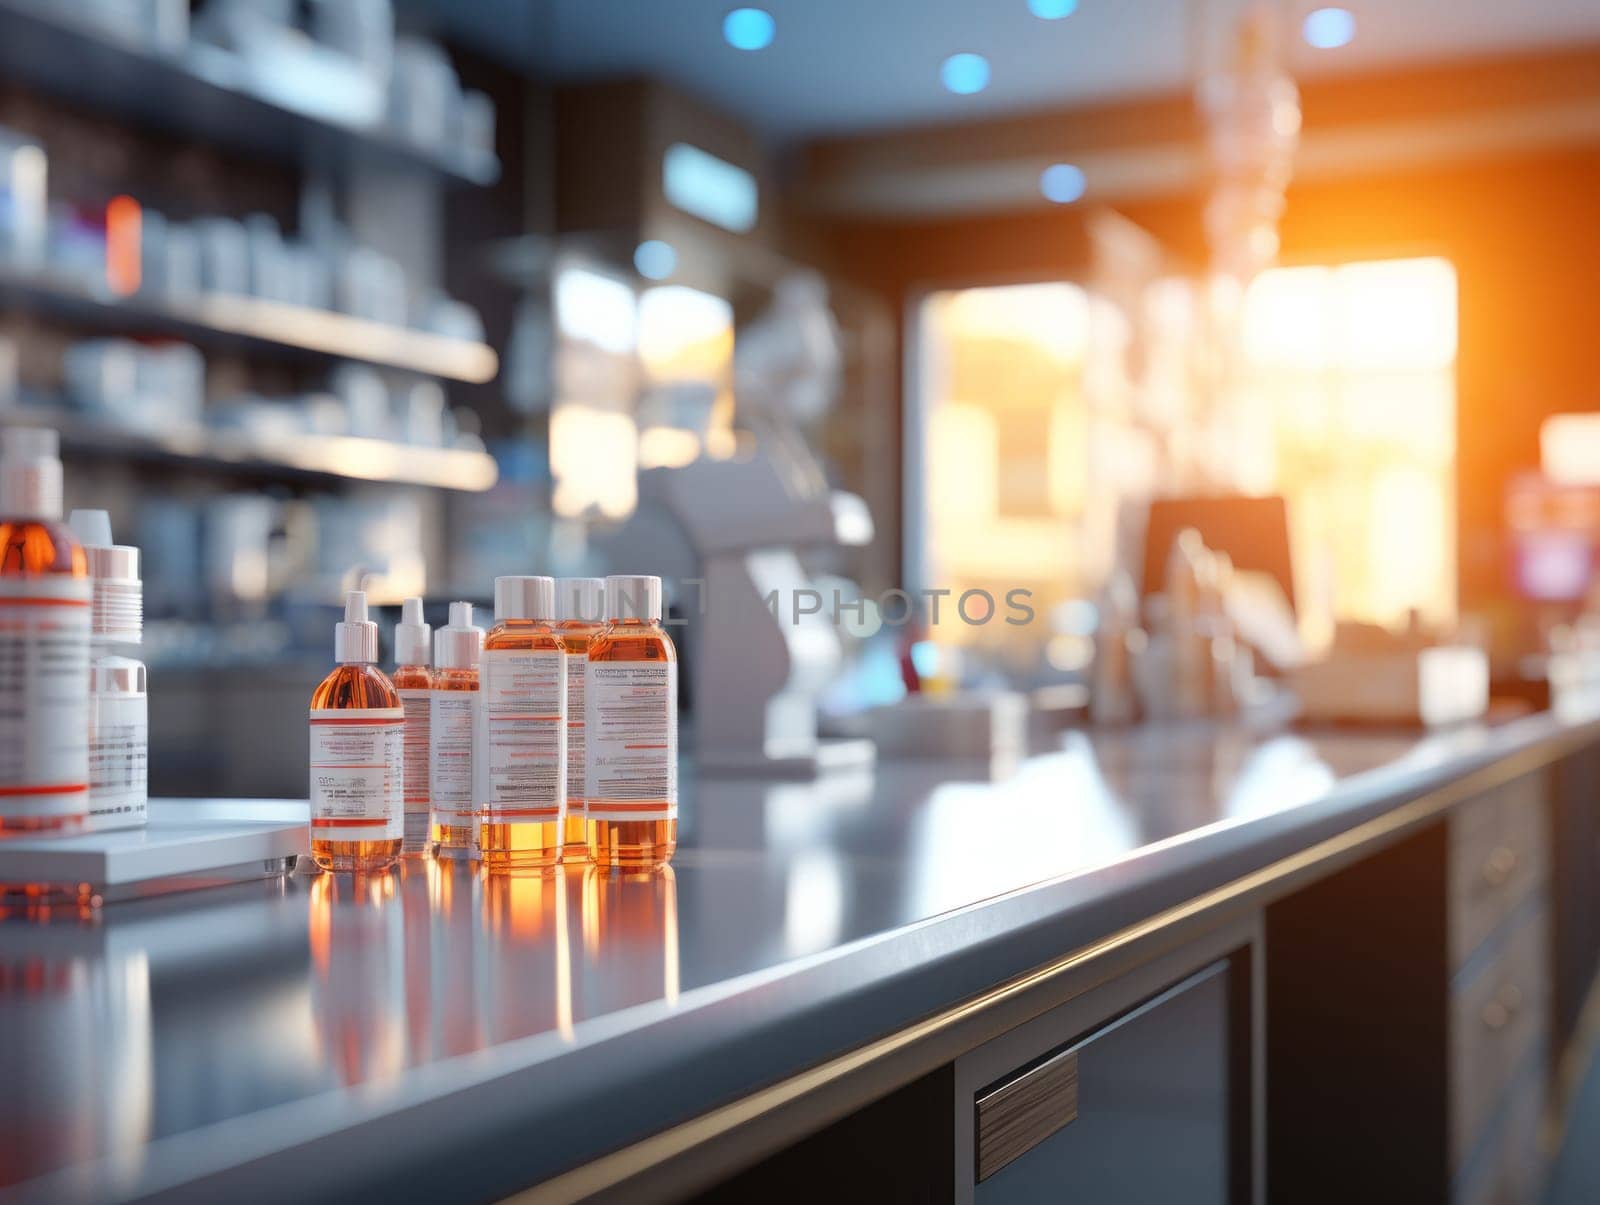 Blurred background of a pharmacy store by NataliPopova